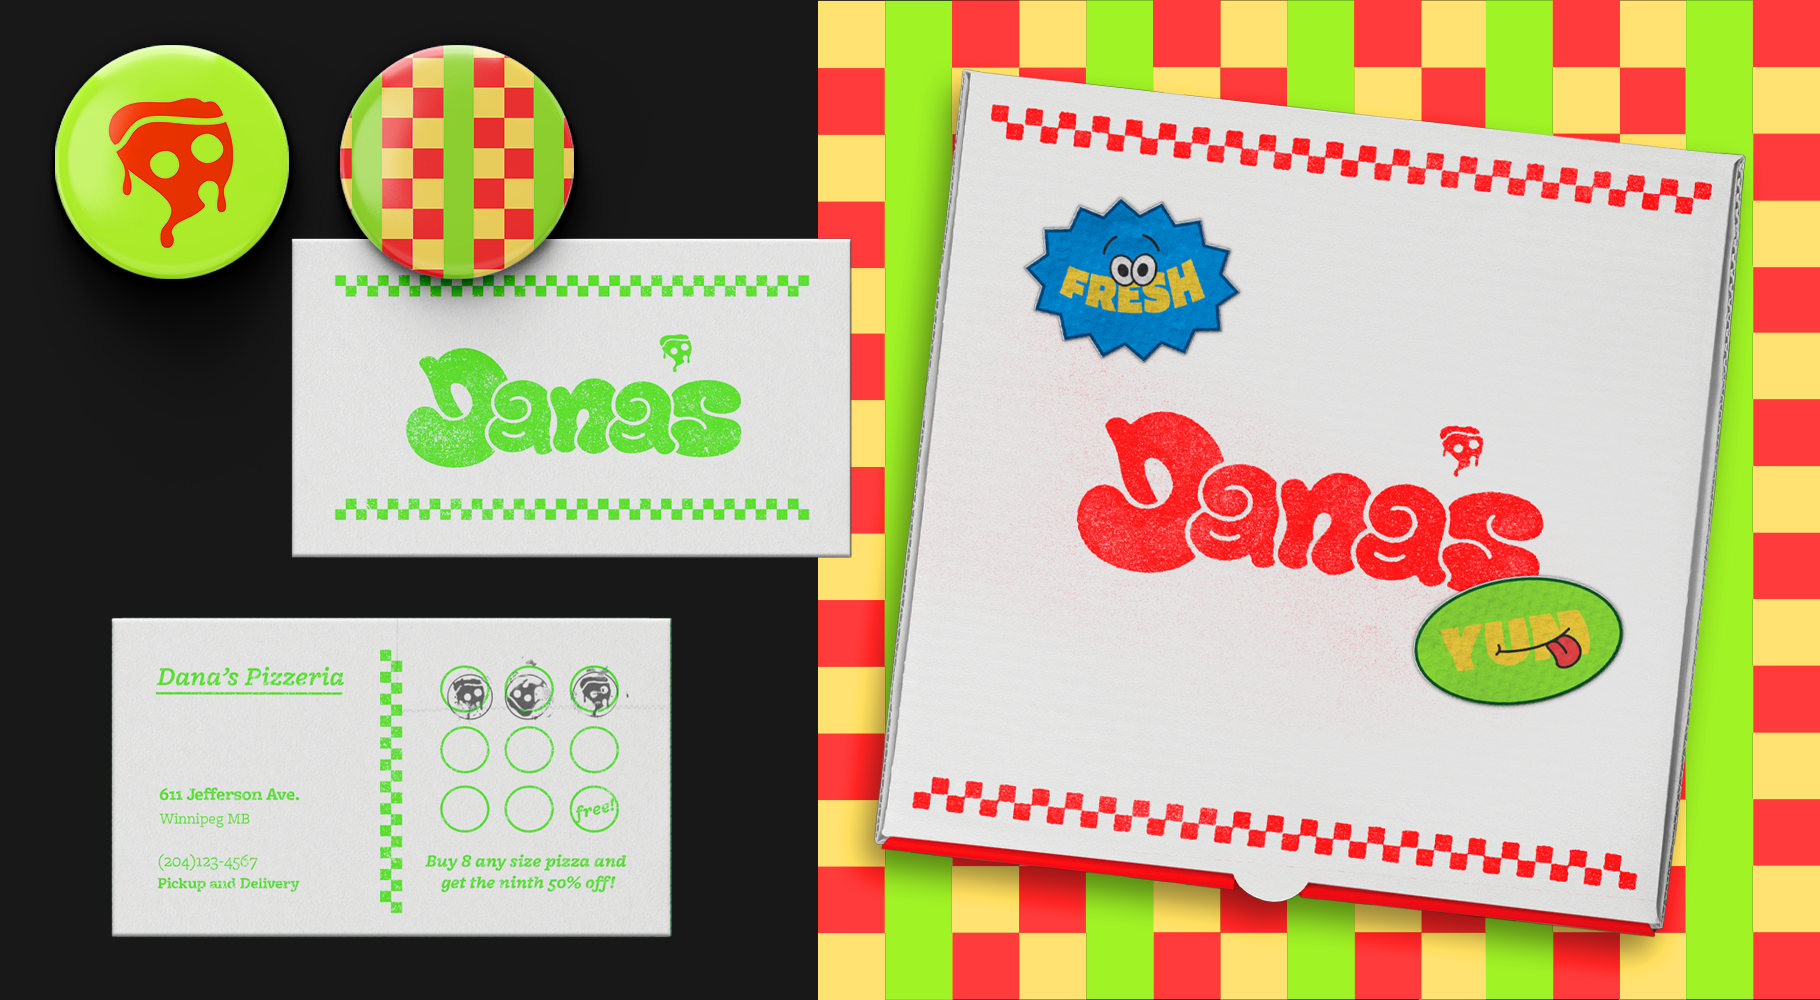 Loyality card, buttons, and pizza box for the brand 